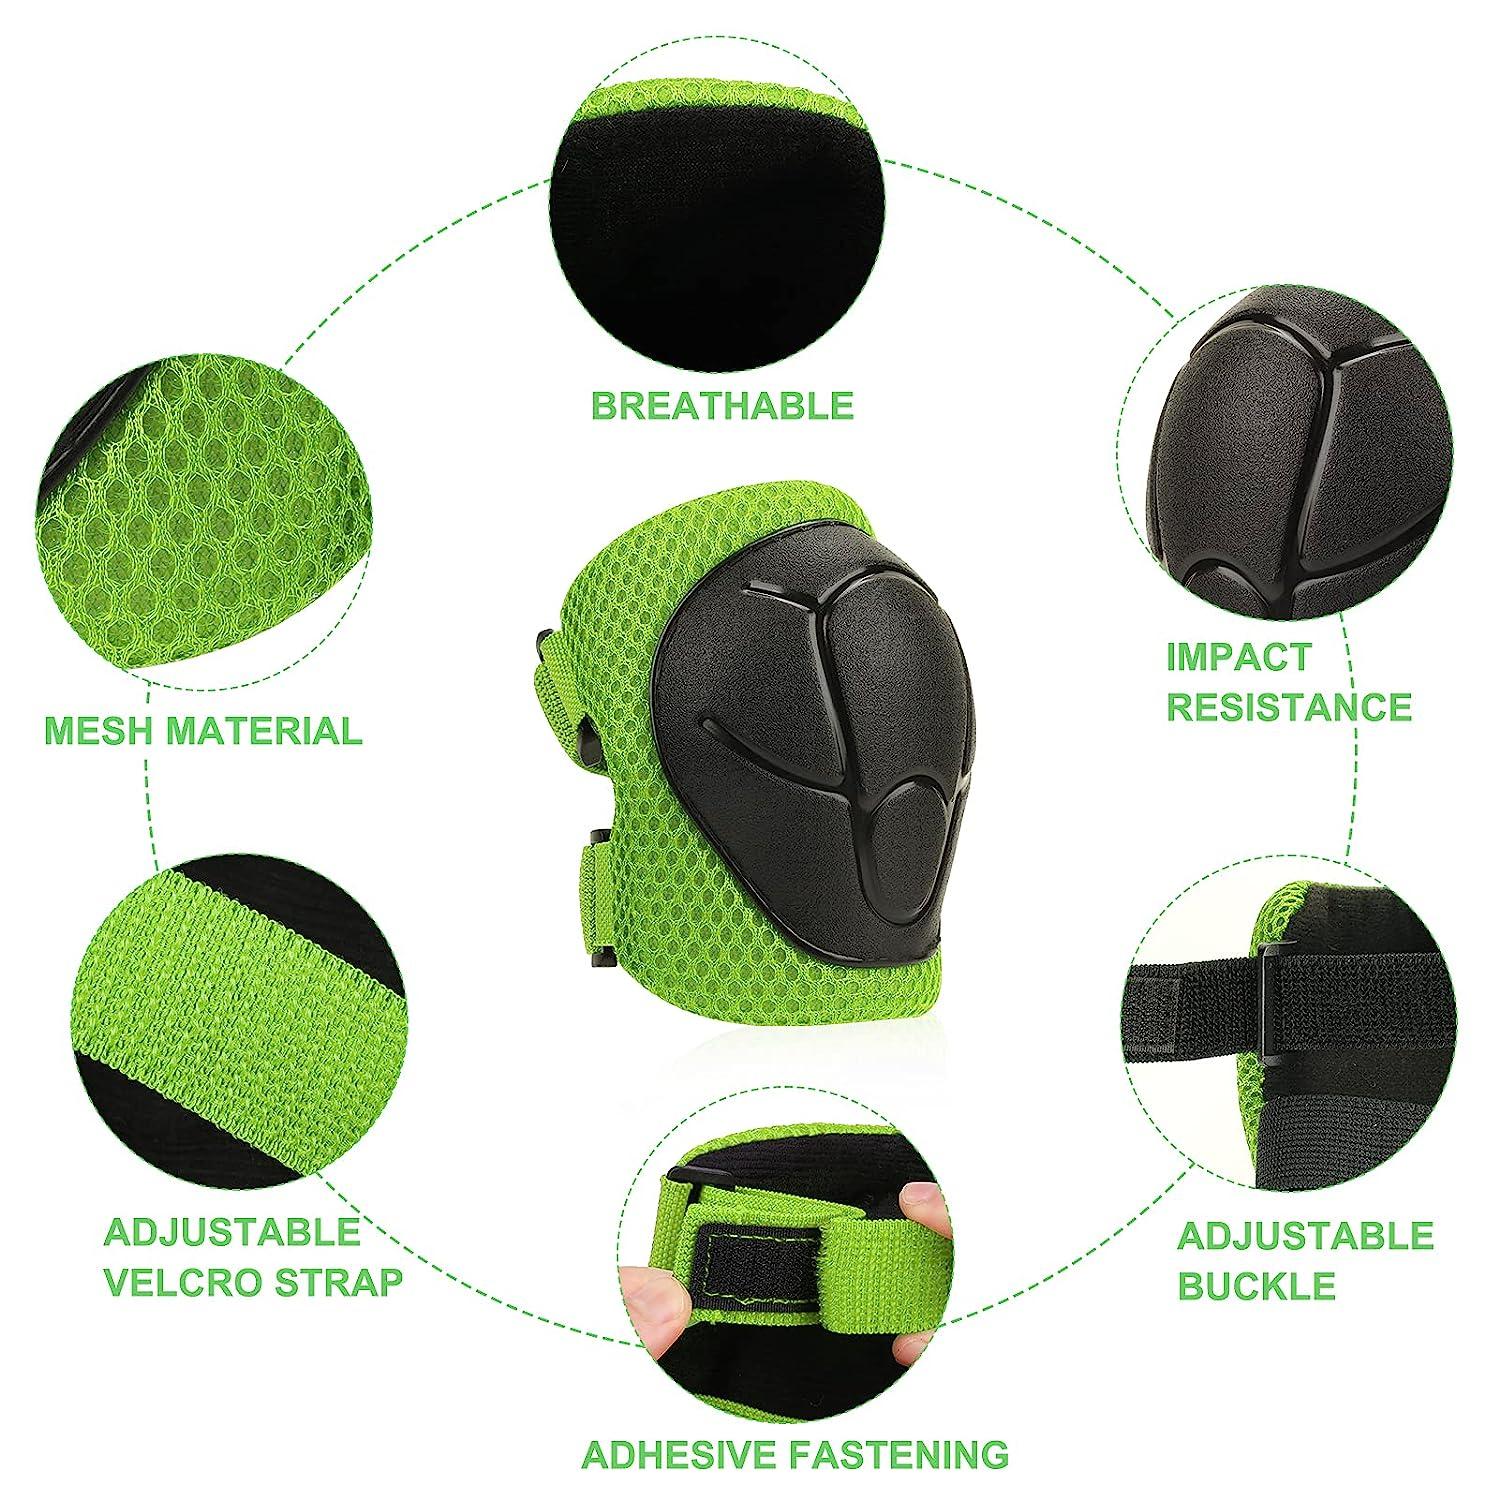 Kids Protective Gear, Helmet Knee Pads and Elbow Pads Set with Wrist Guard  Skateboard Accessories for Rollerblading Skateboard Cycling Skating